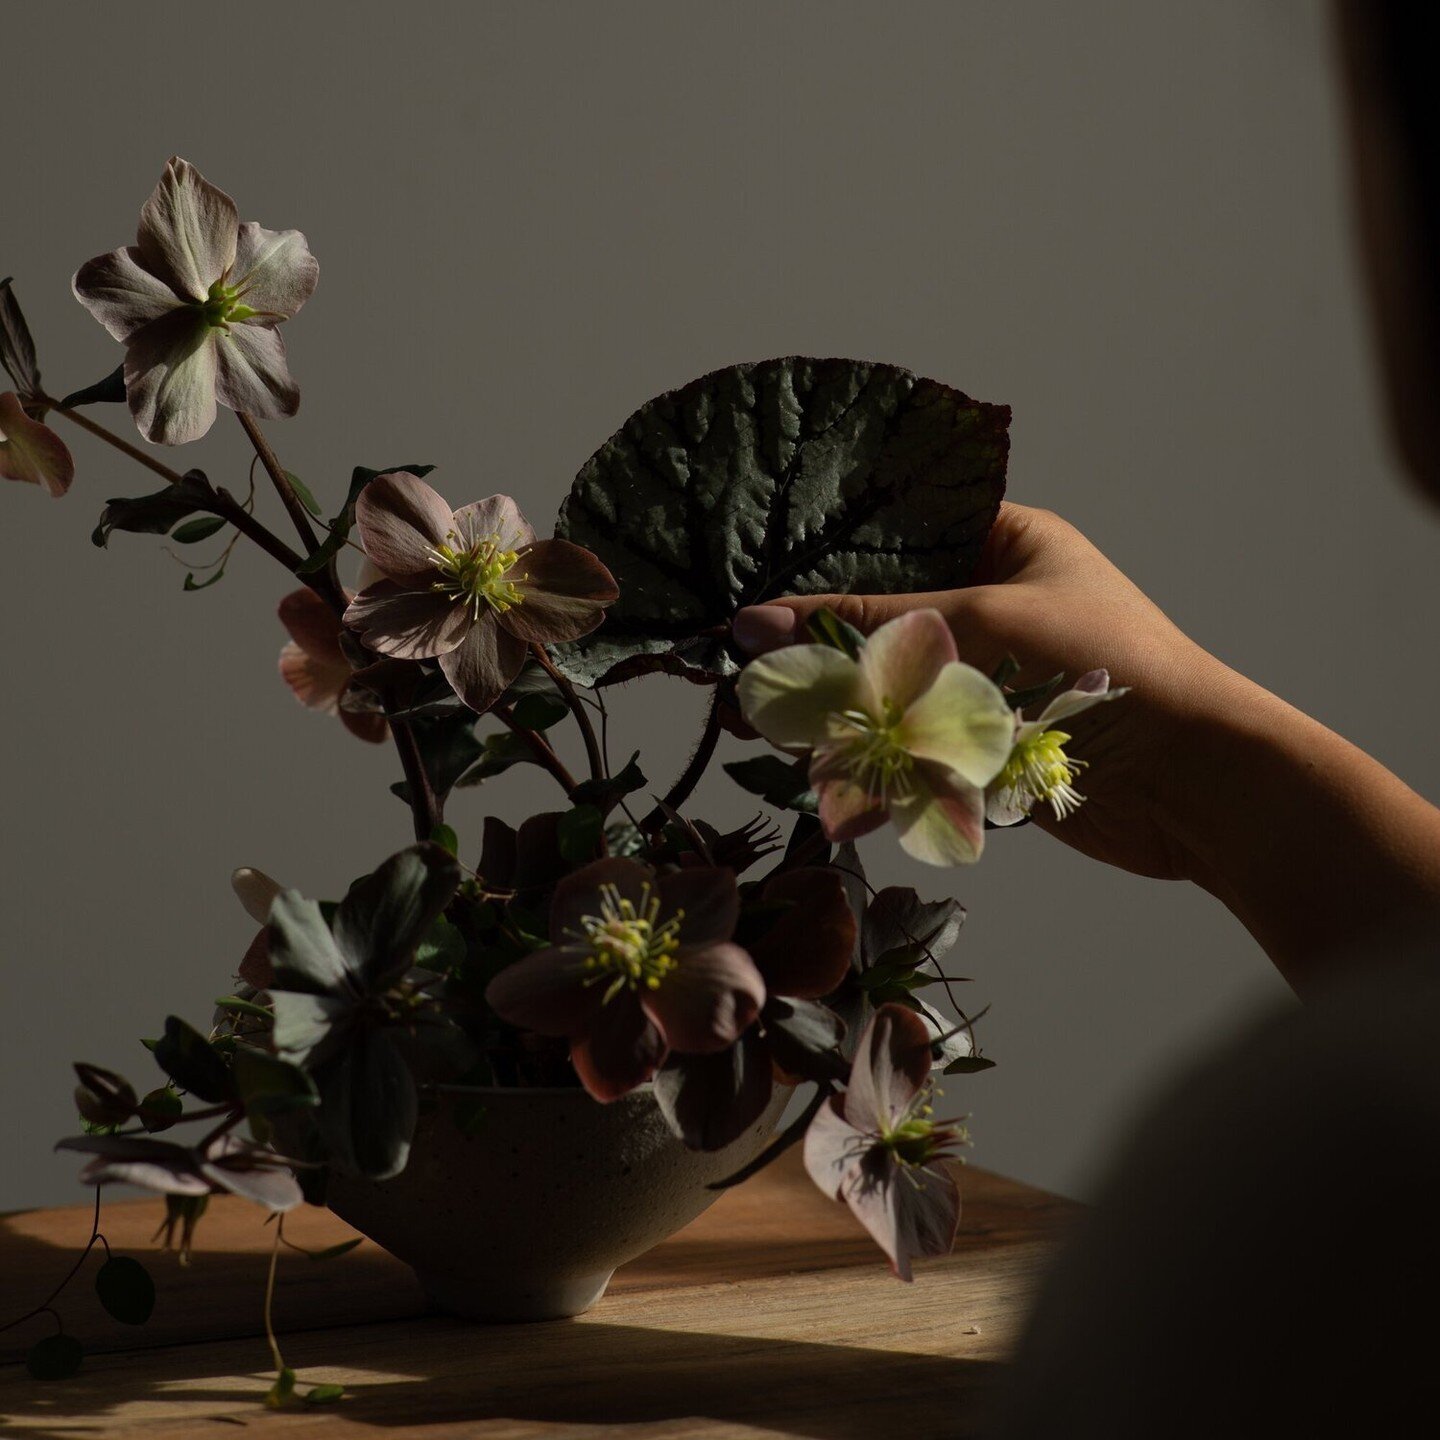 A practice of observing the seasons, being in relationship with nature, and humbled by beauty, Ikebana has been redefining and shaping the world of floral artistry. You can easily spot the influence of Ikebana through the use distinctive asymmetric s